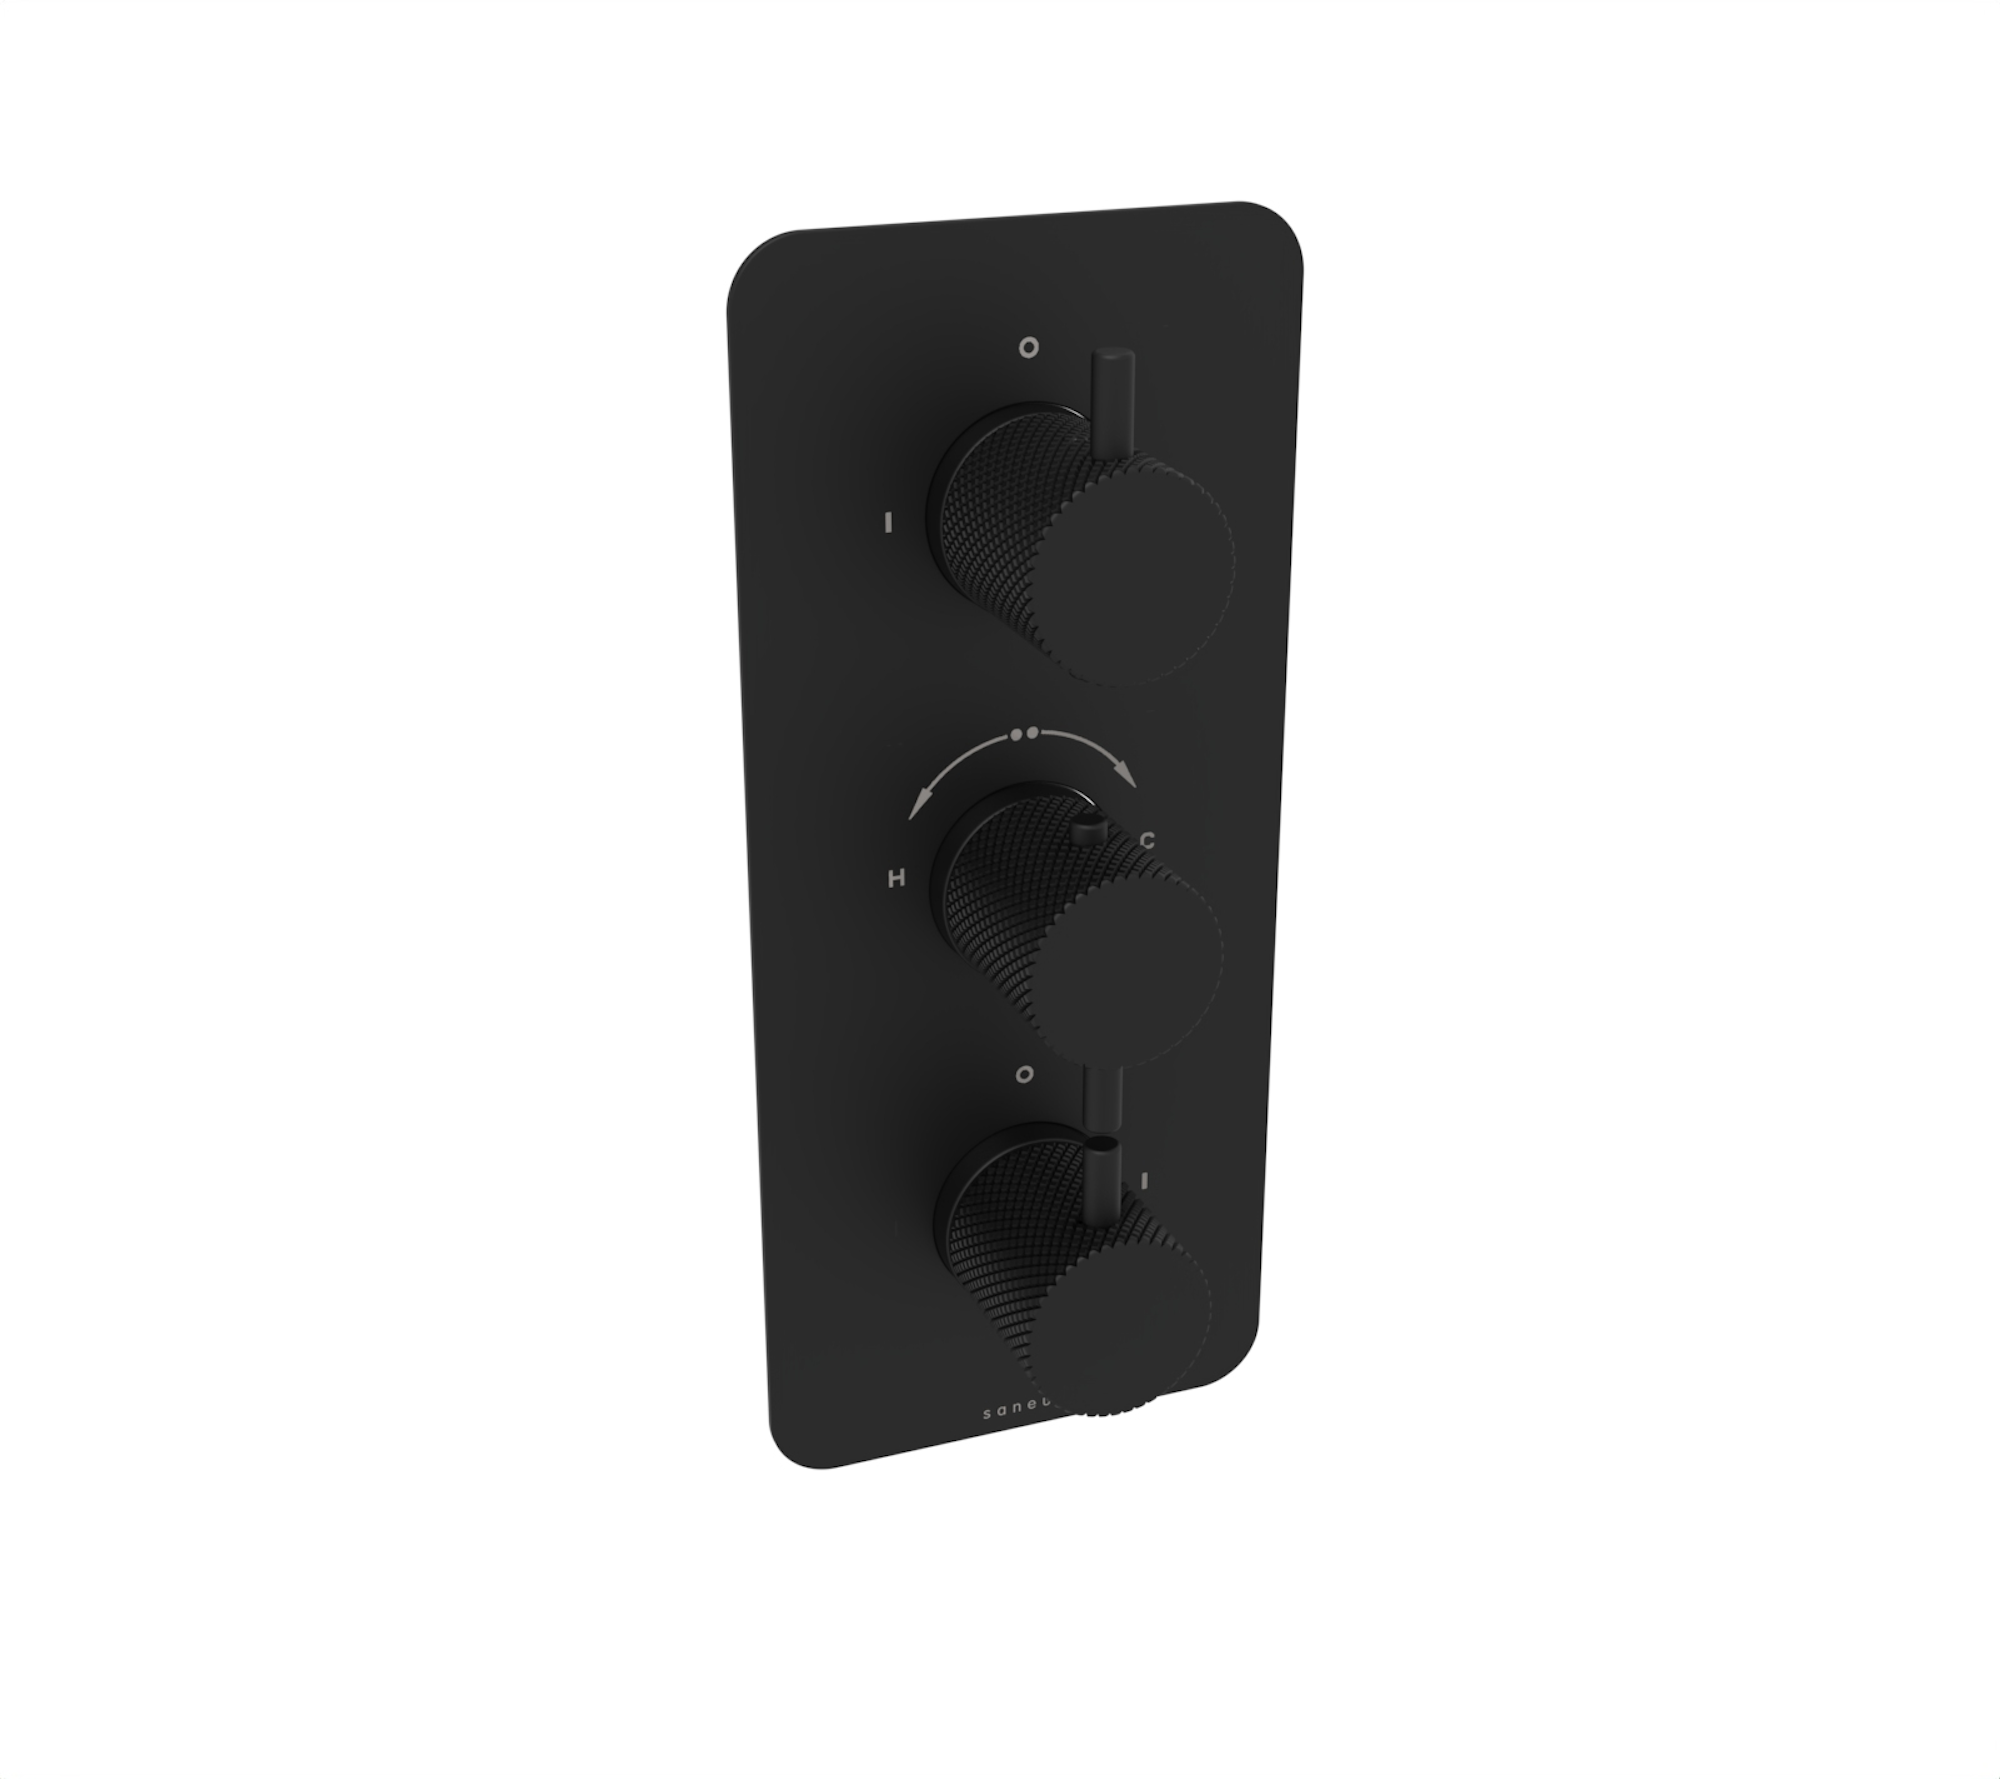 COS 2 way thermostatic low pressure shower valve kit with knurled handles - Matte Black